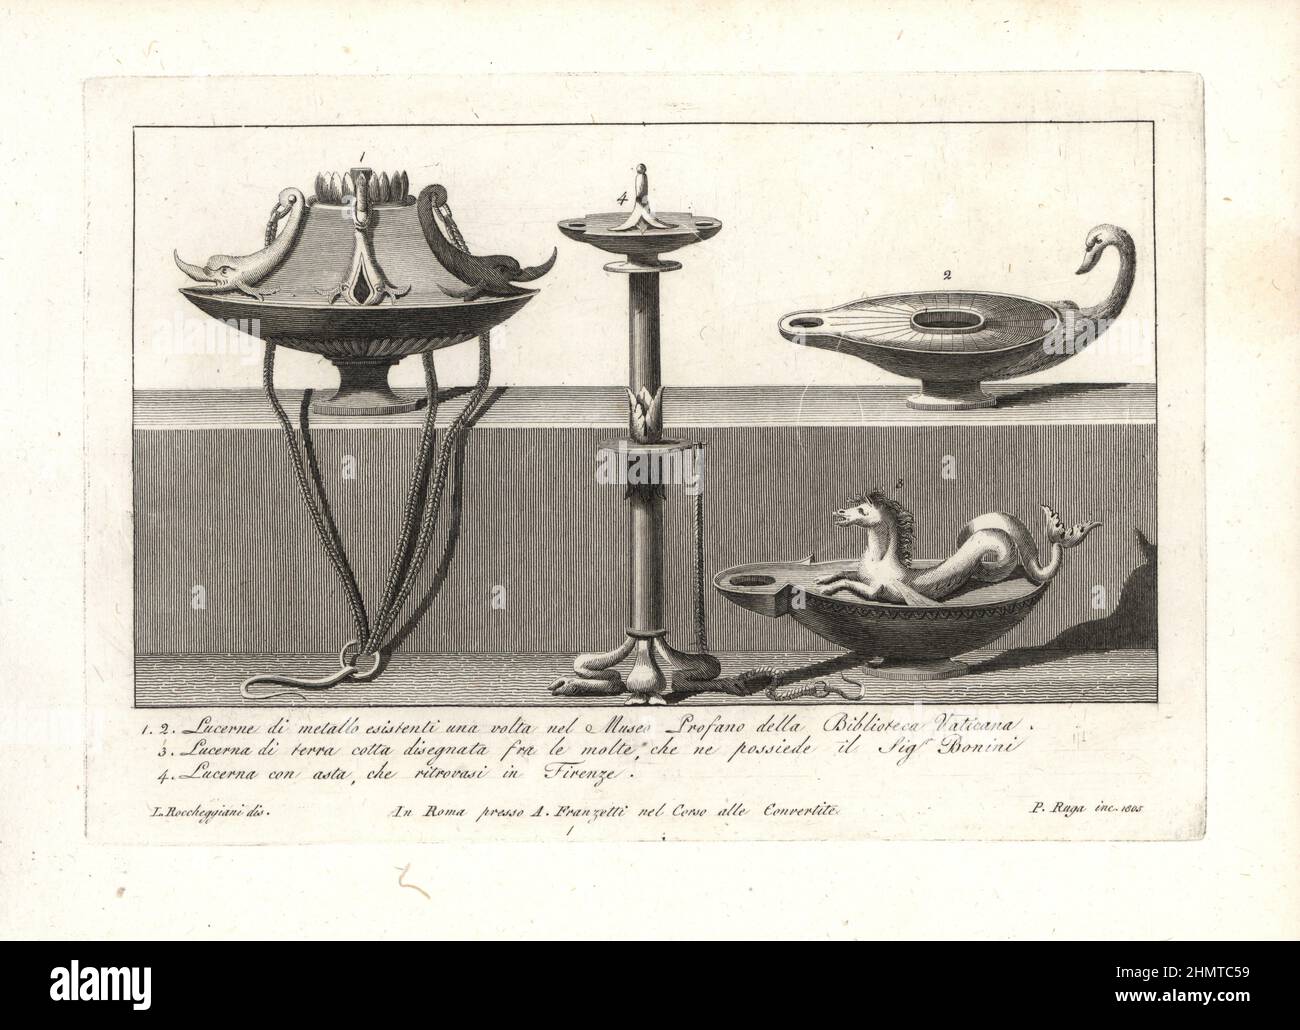 Metal oil lamps with dolphins and swan from the Profane Museum, Vatican Library 1,2, terracotta lamp with chimera owned by Bonini 3, and lamp on a pillar found in Florence 4. Copperplate engraving by Pietro Ruga after an illustration by Lorenzo Rocceggiani from his own 100 Plates of Costumes Religious, Civil and Military of the Ancient Egyptians, Etruscans, Greeks and Romans, Franzetti, Rome, 1802. Stock Photo